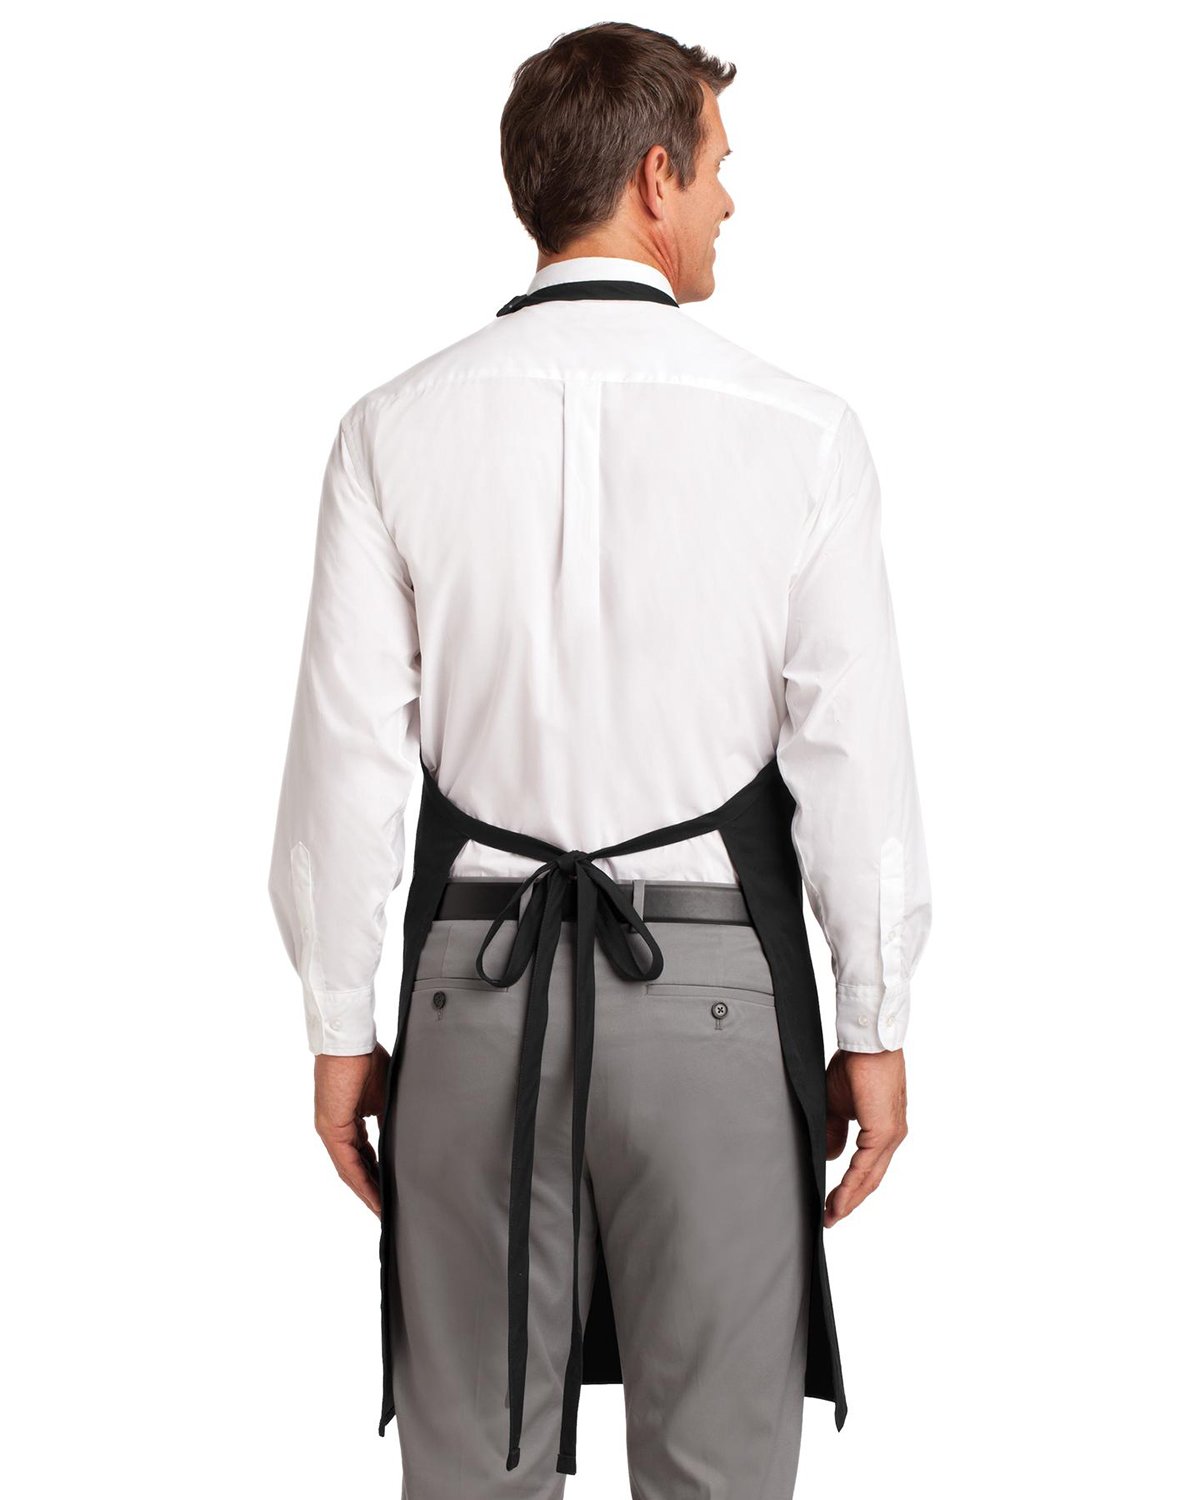 'Port Authority A704 Easy Care Tuxedo Apron with Stain Release'